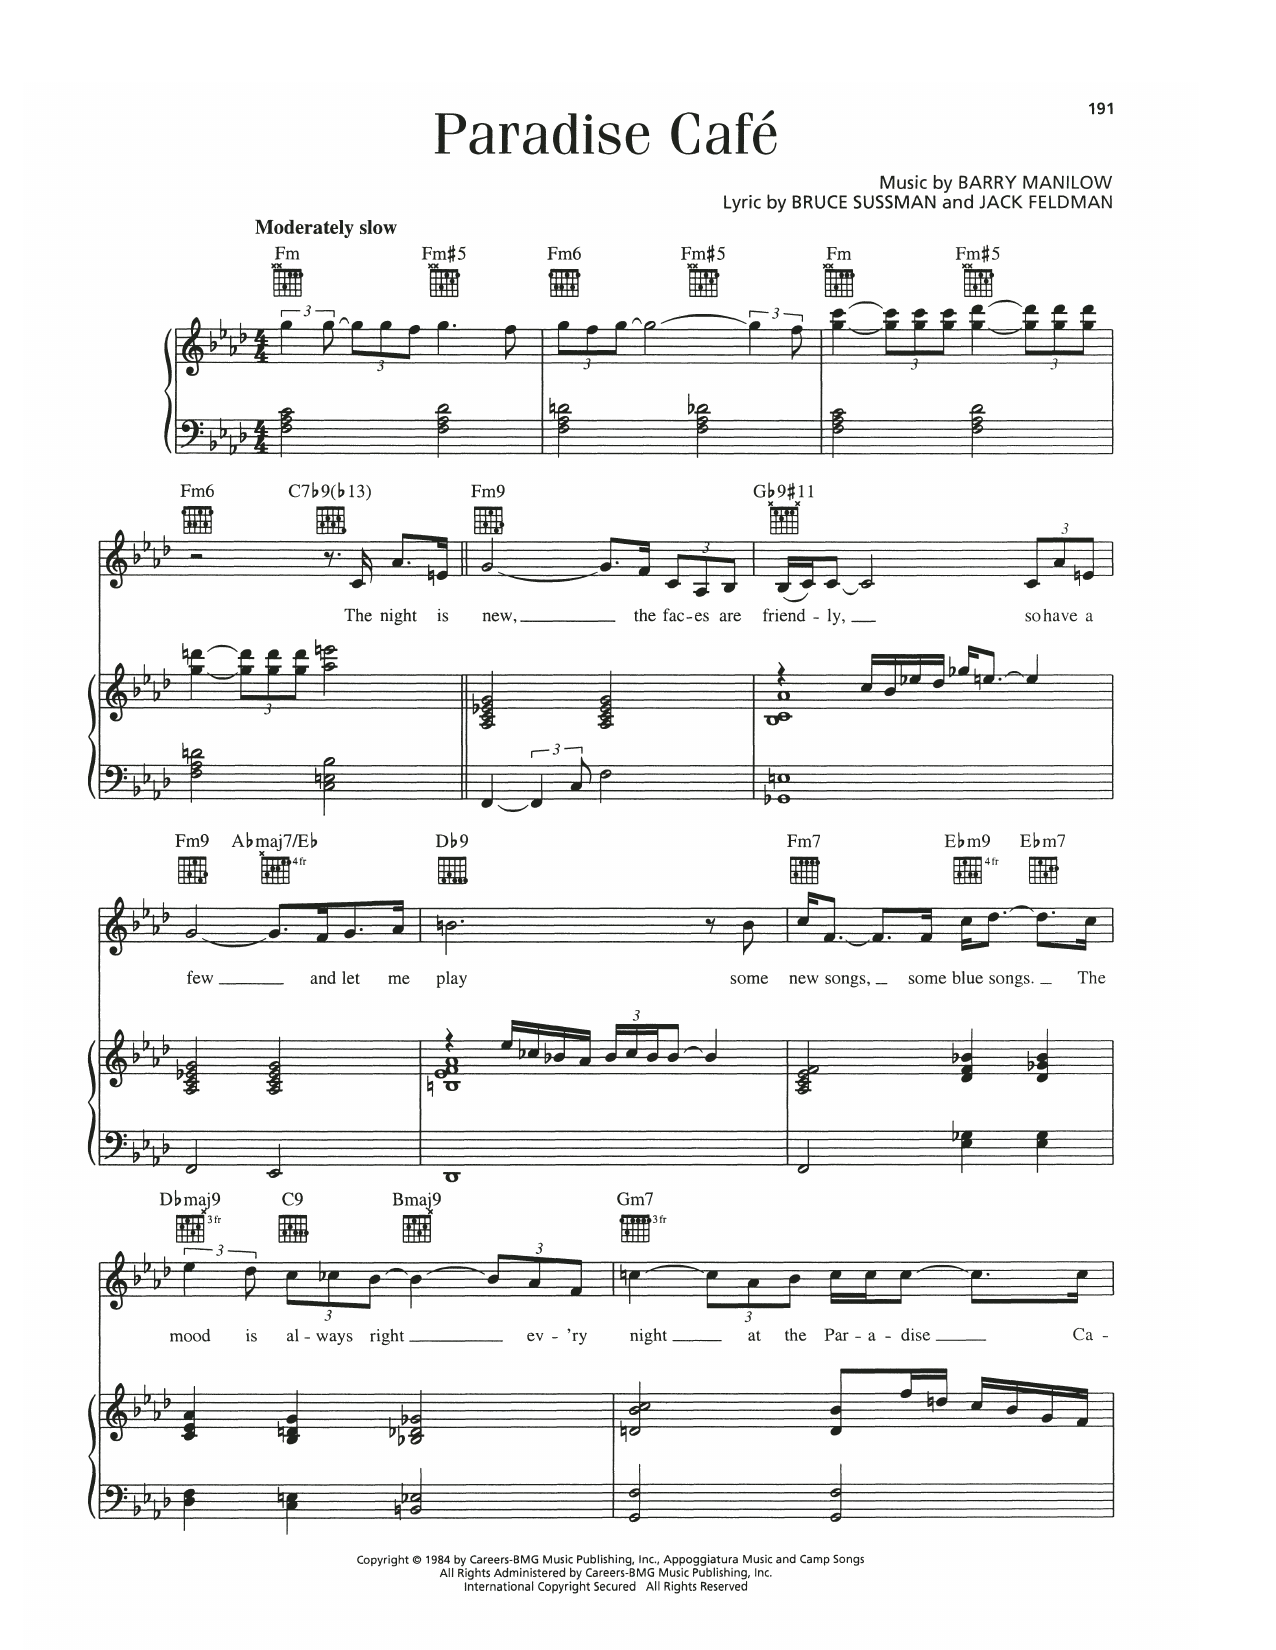 Download Barry Manilow Paradise Cafe Sheet Music